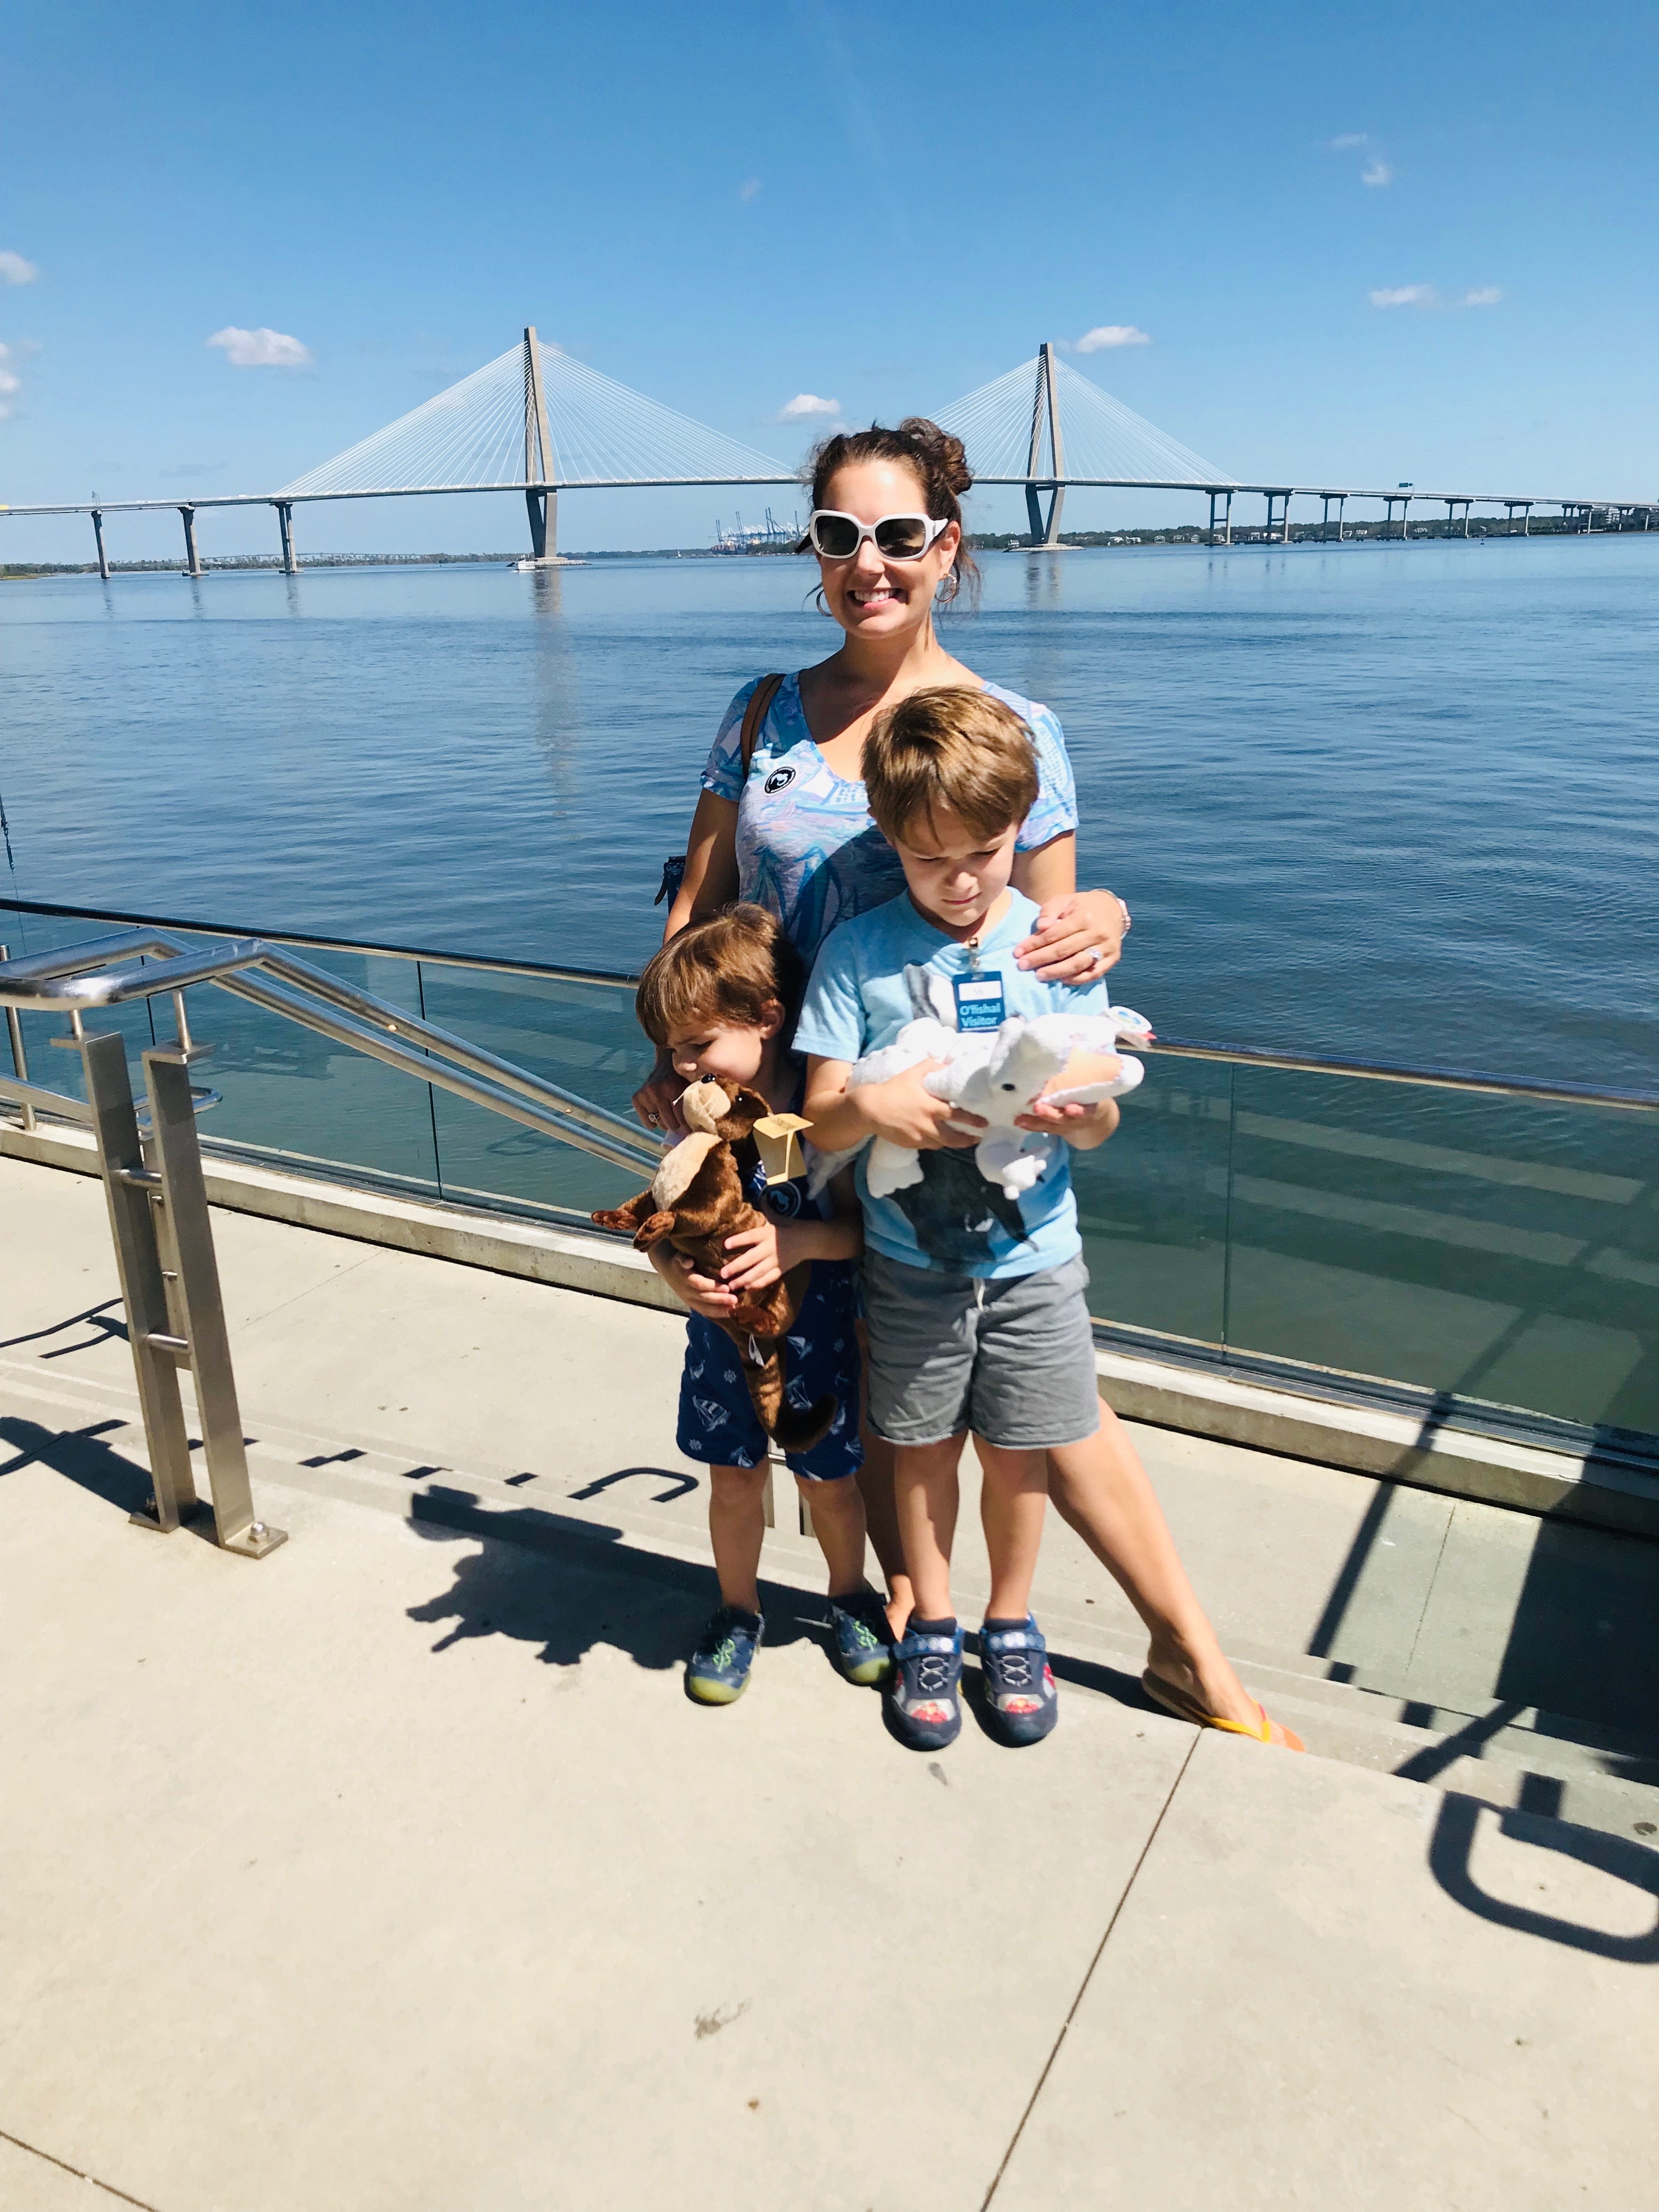 Charleston SC With Kids, Things To Do In Charleston With Kids